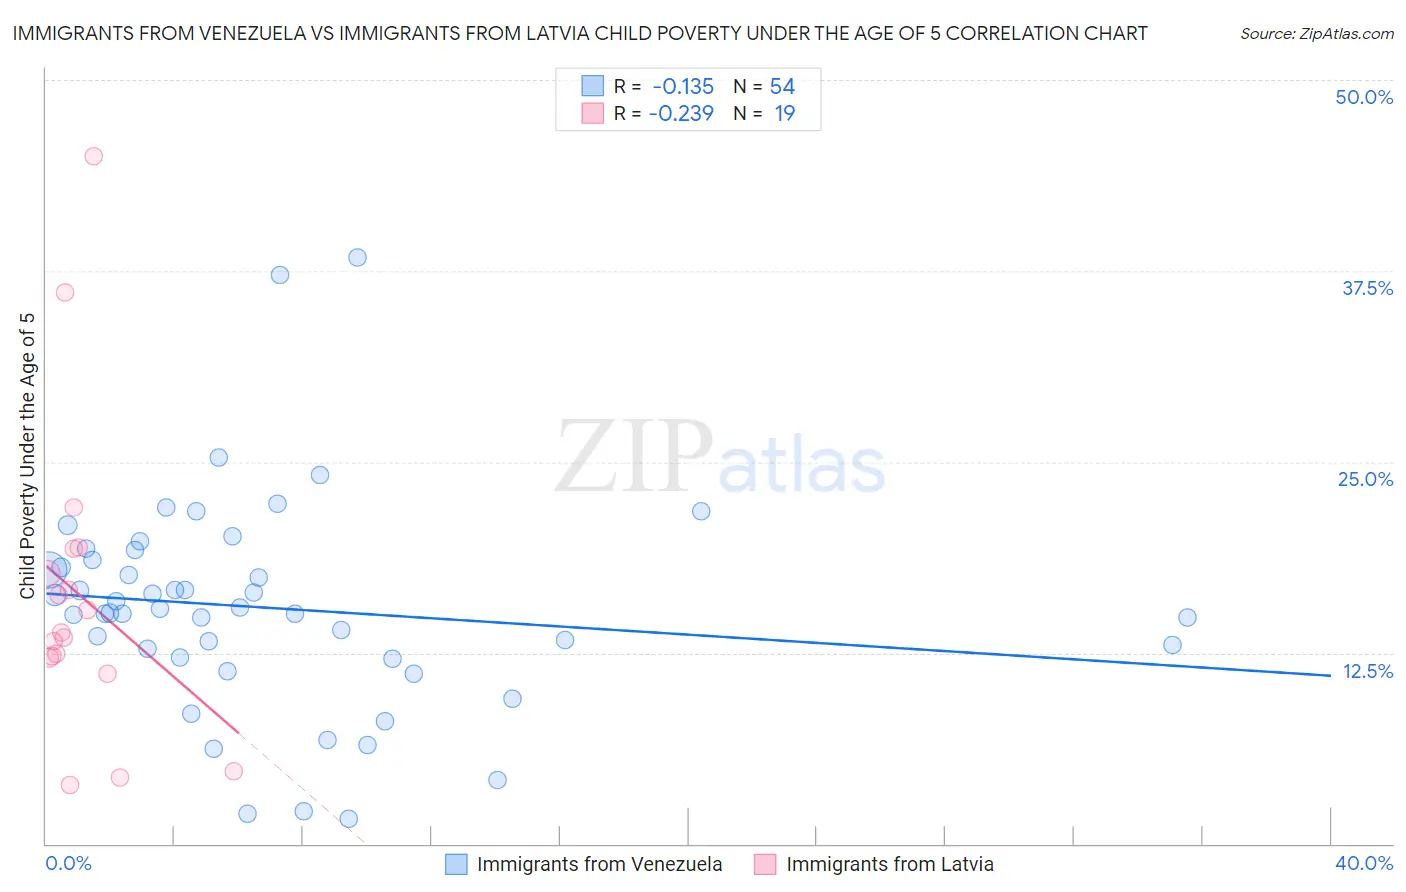 Immigrants from Venezuela vs Immigrants from Latvia Child Poverty Under the Age of 5